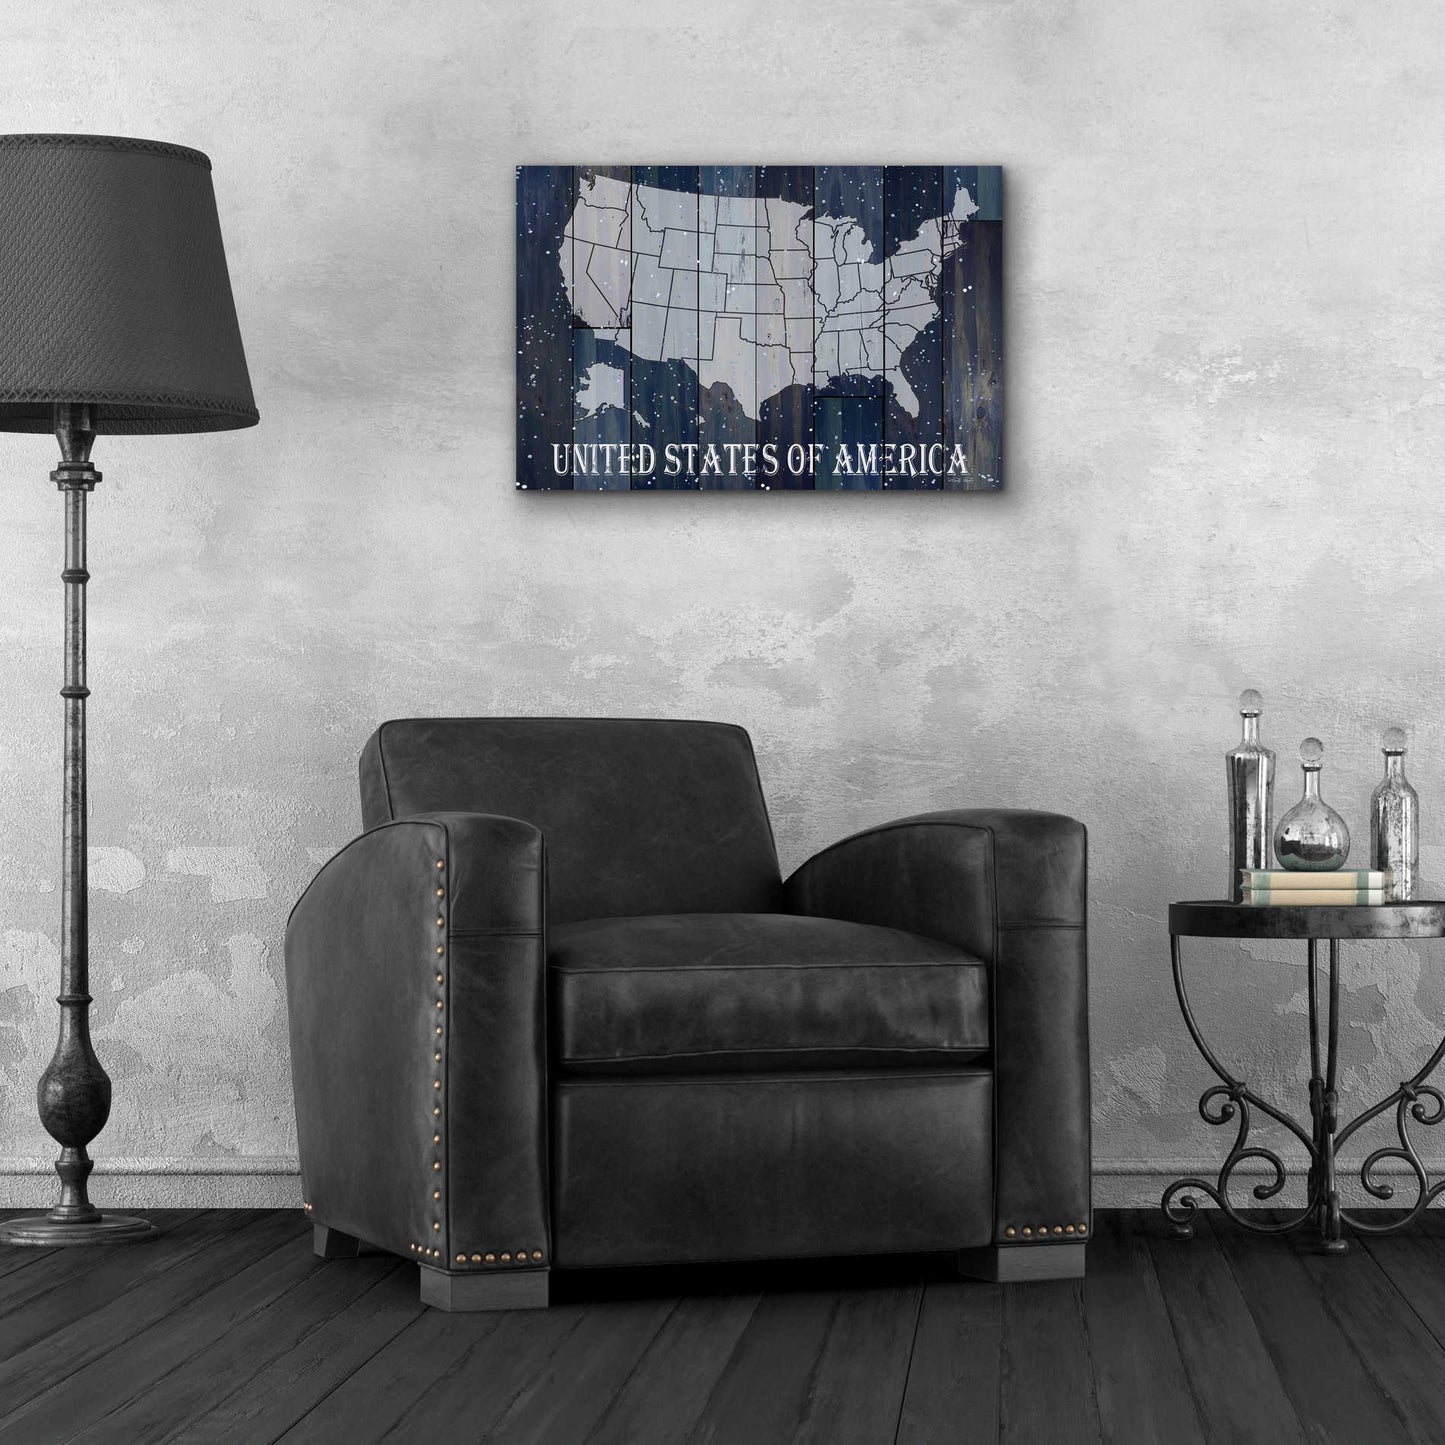 Epic Art 'Navy United States of America' by Cindy Jacobs, Acrylic Glass Wall Art,24x16